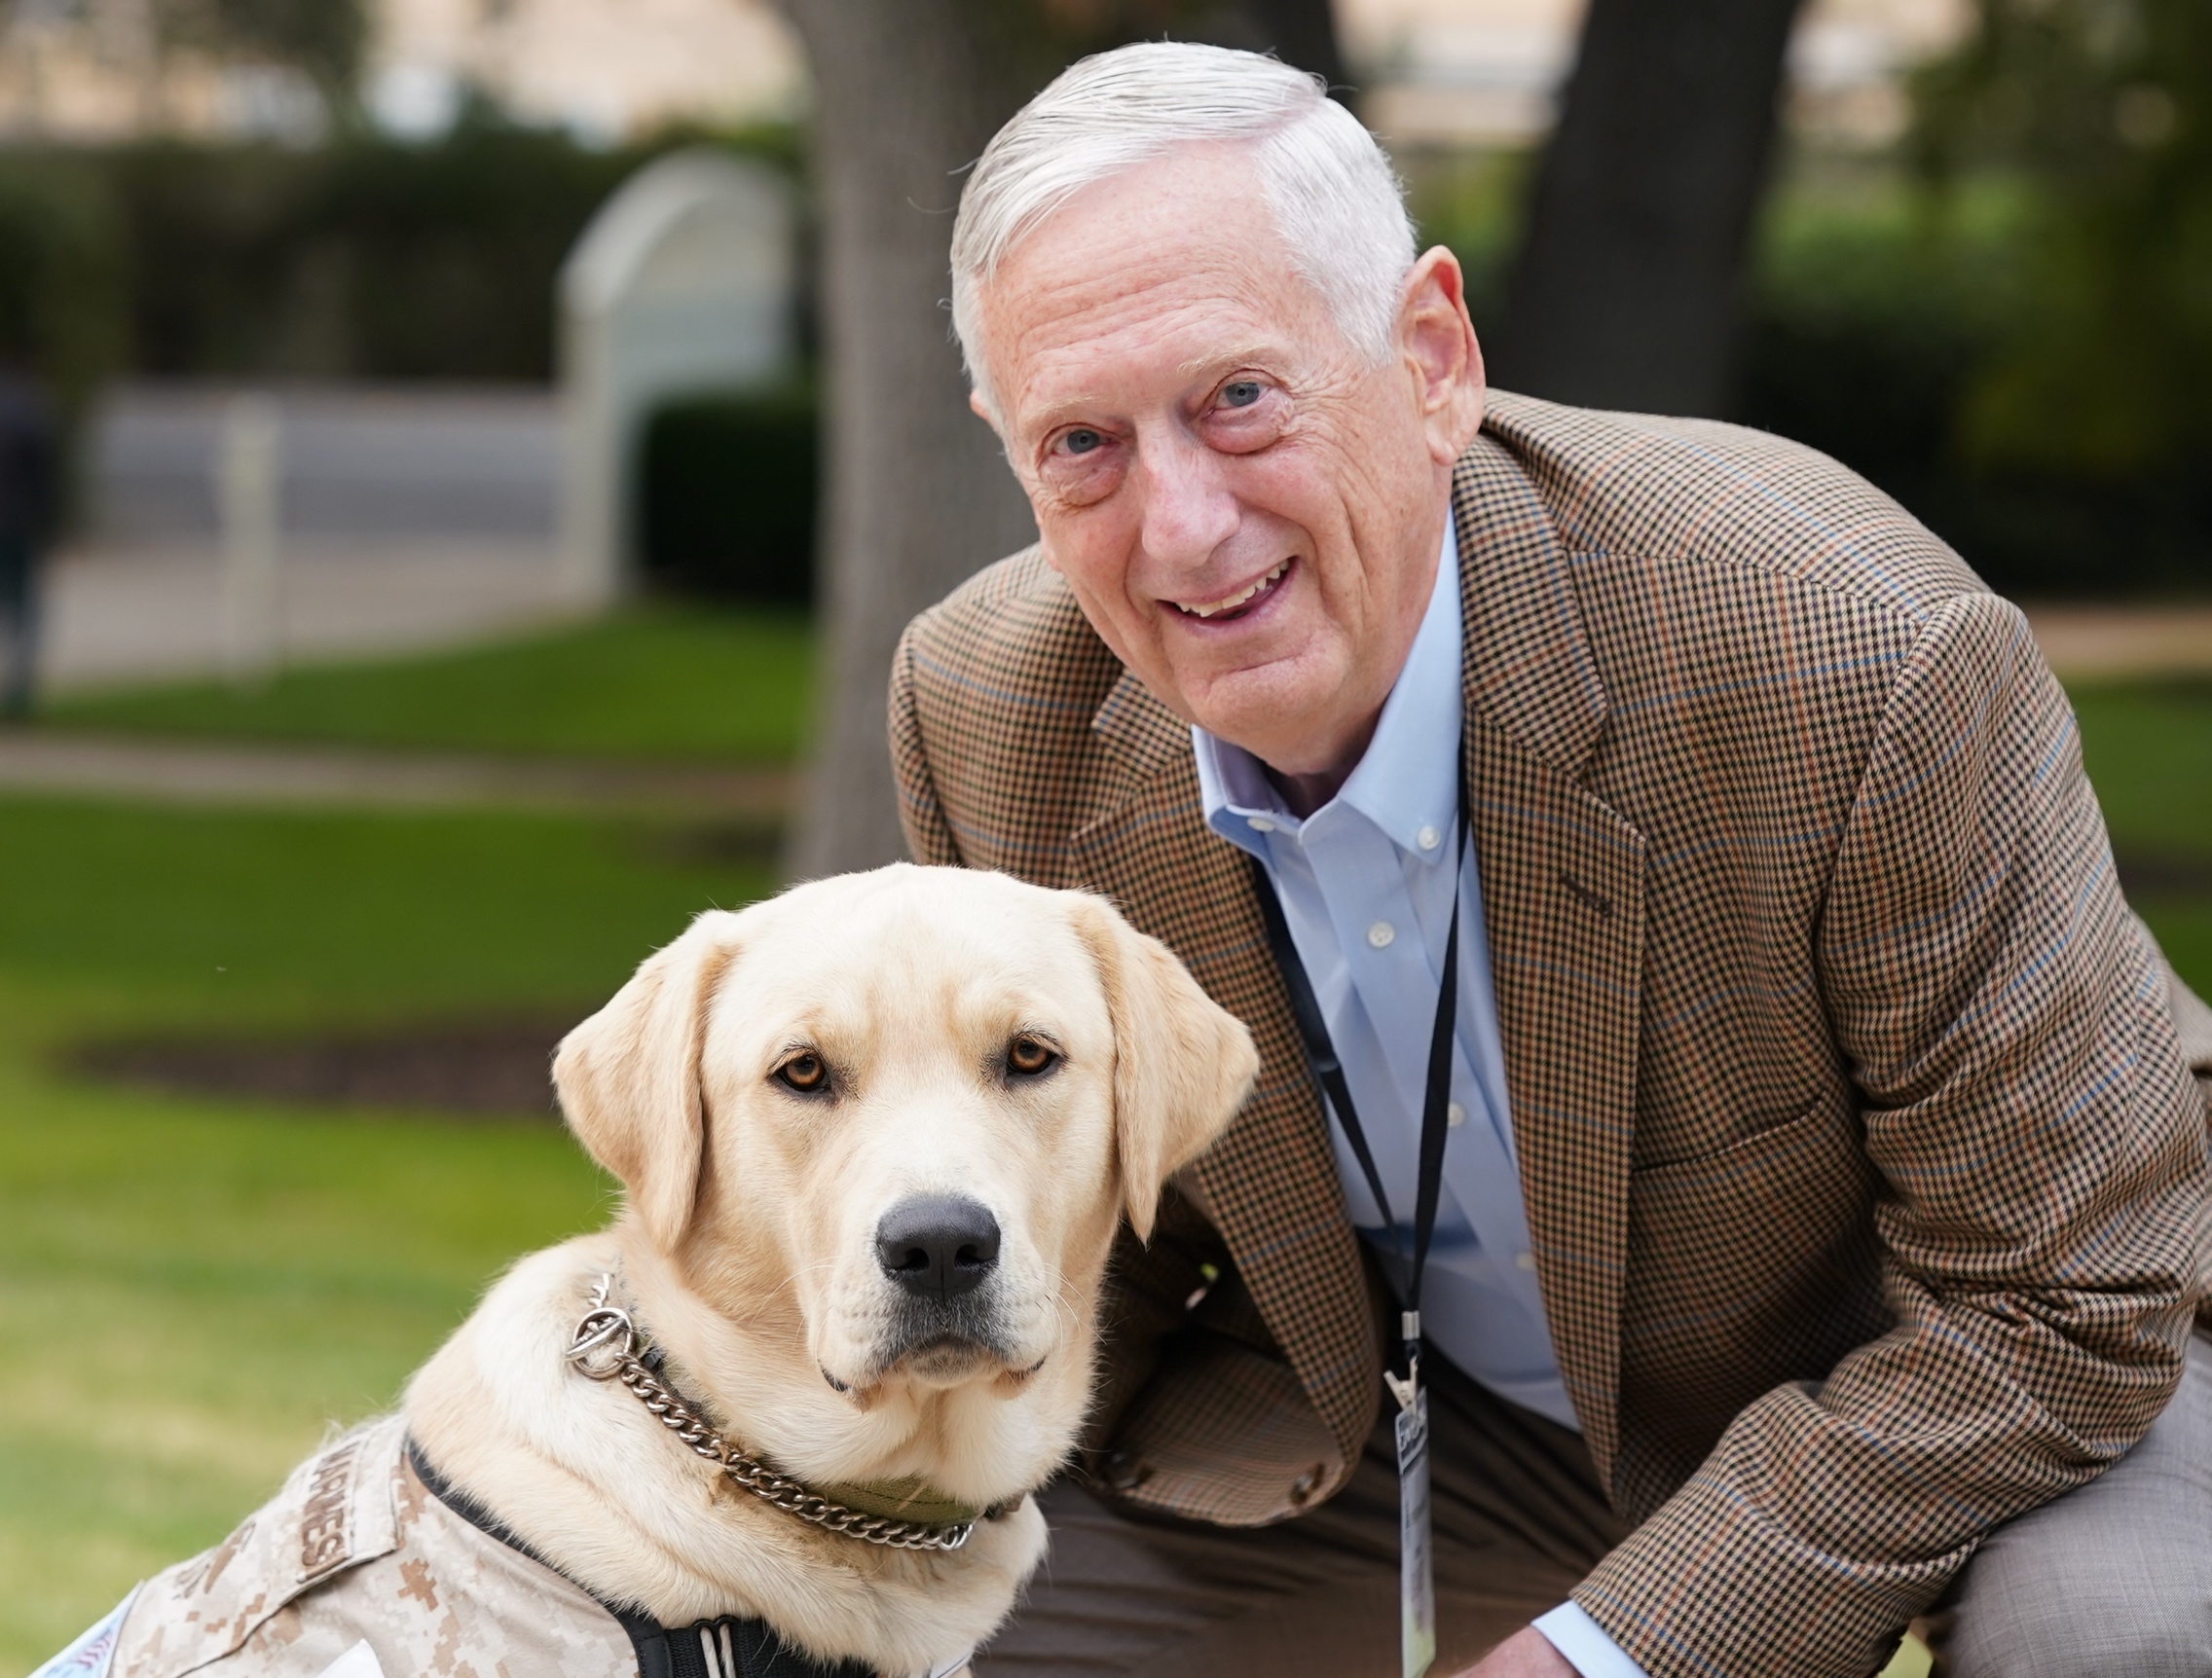 Training service dogs for military members is therapy for veterans at  Penn's new program